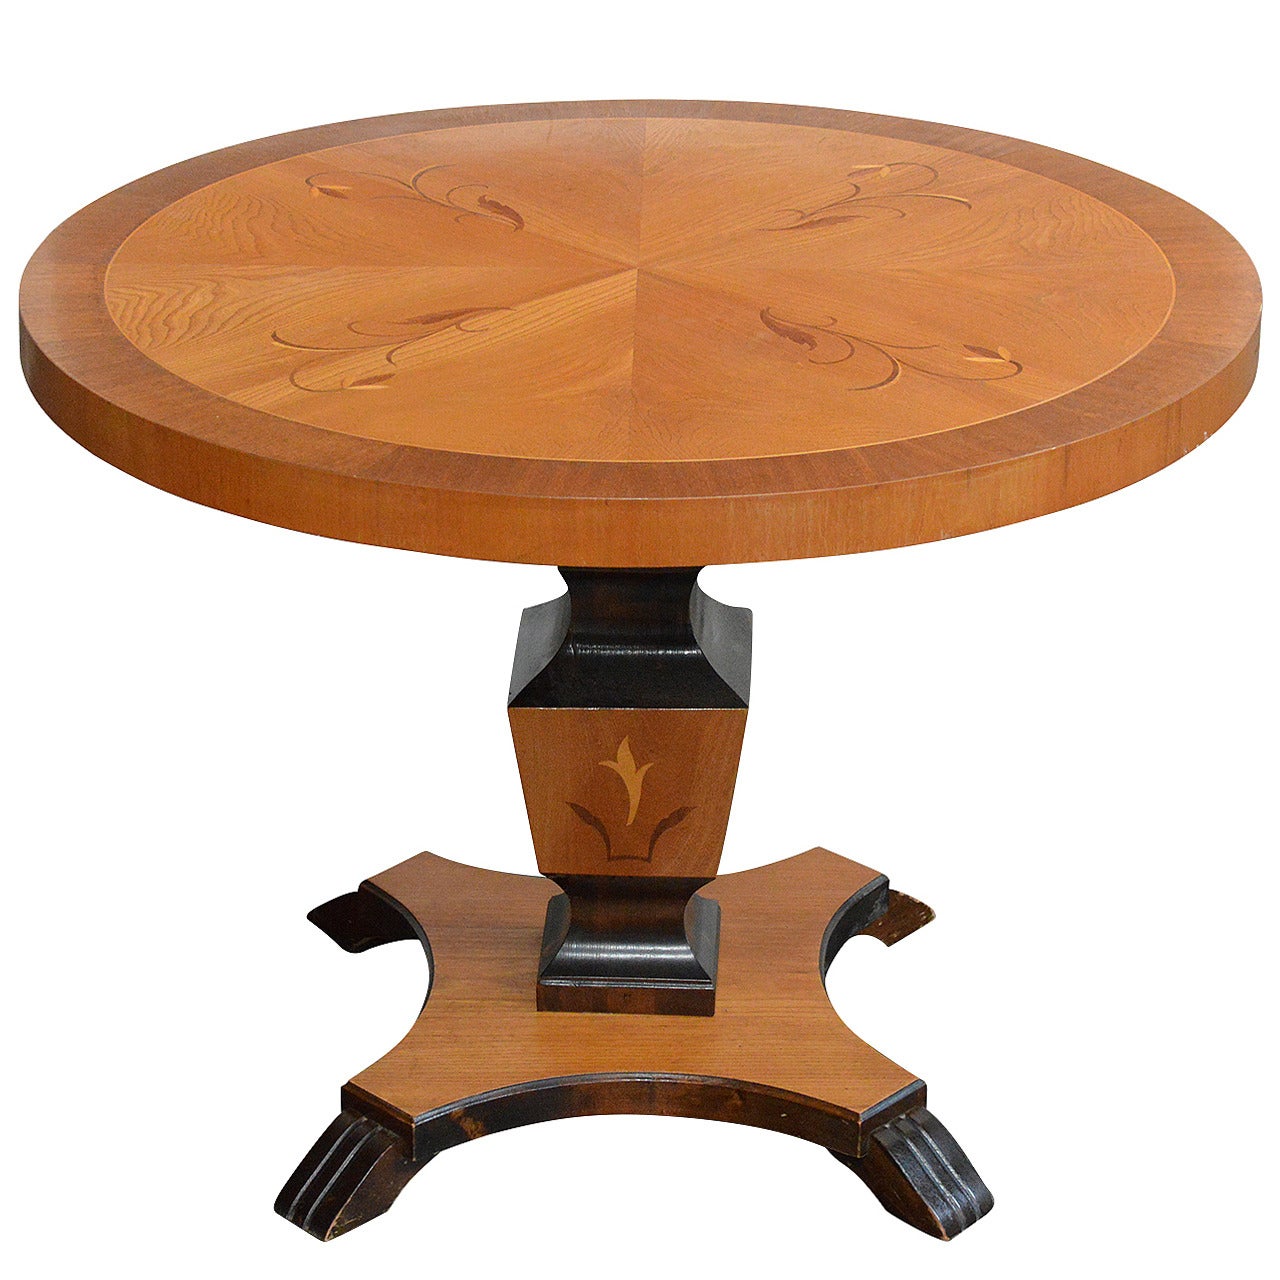 Swedish Art Deco Round Inlaid Pedestal Table For Sale